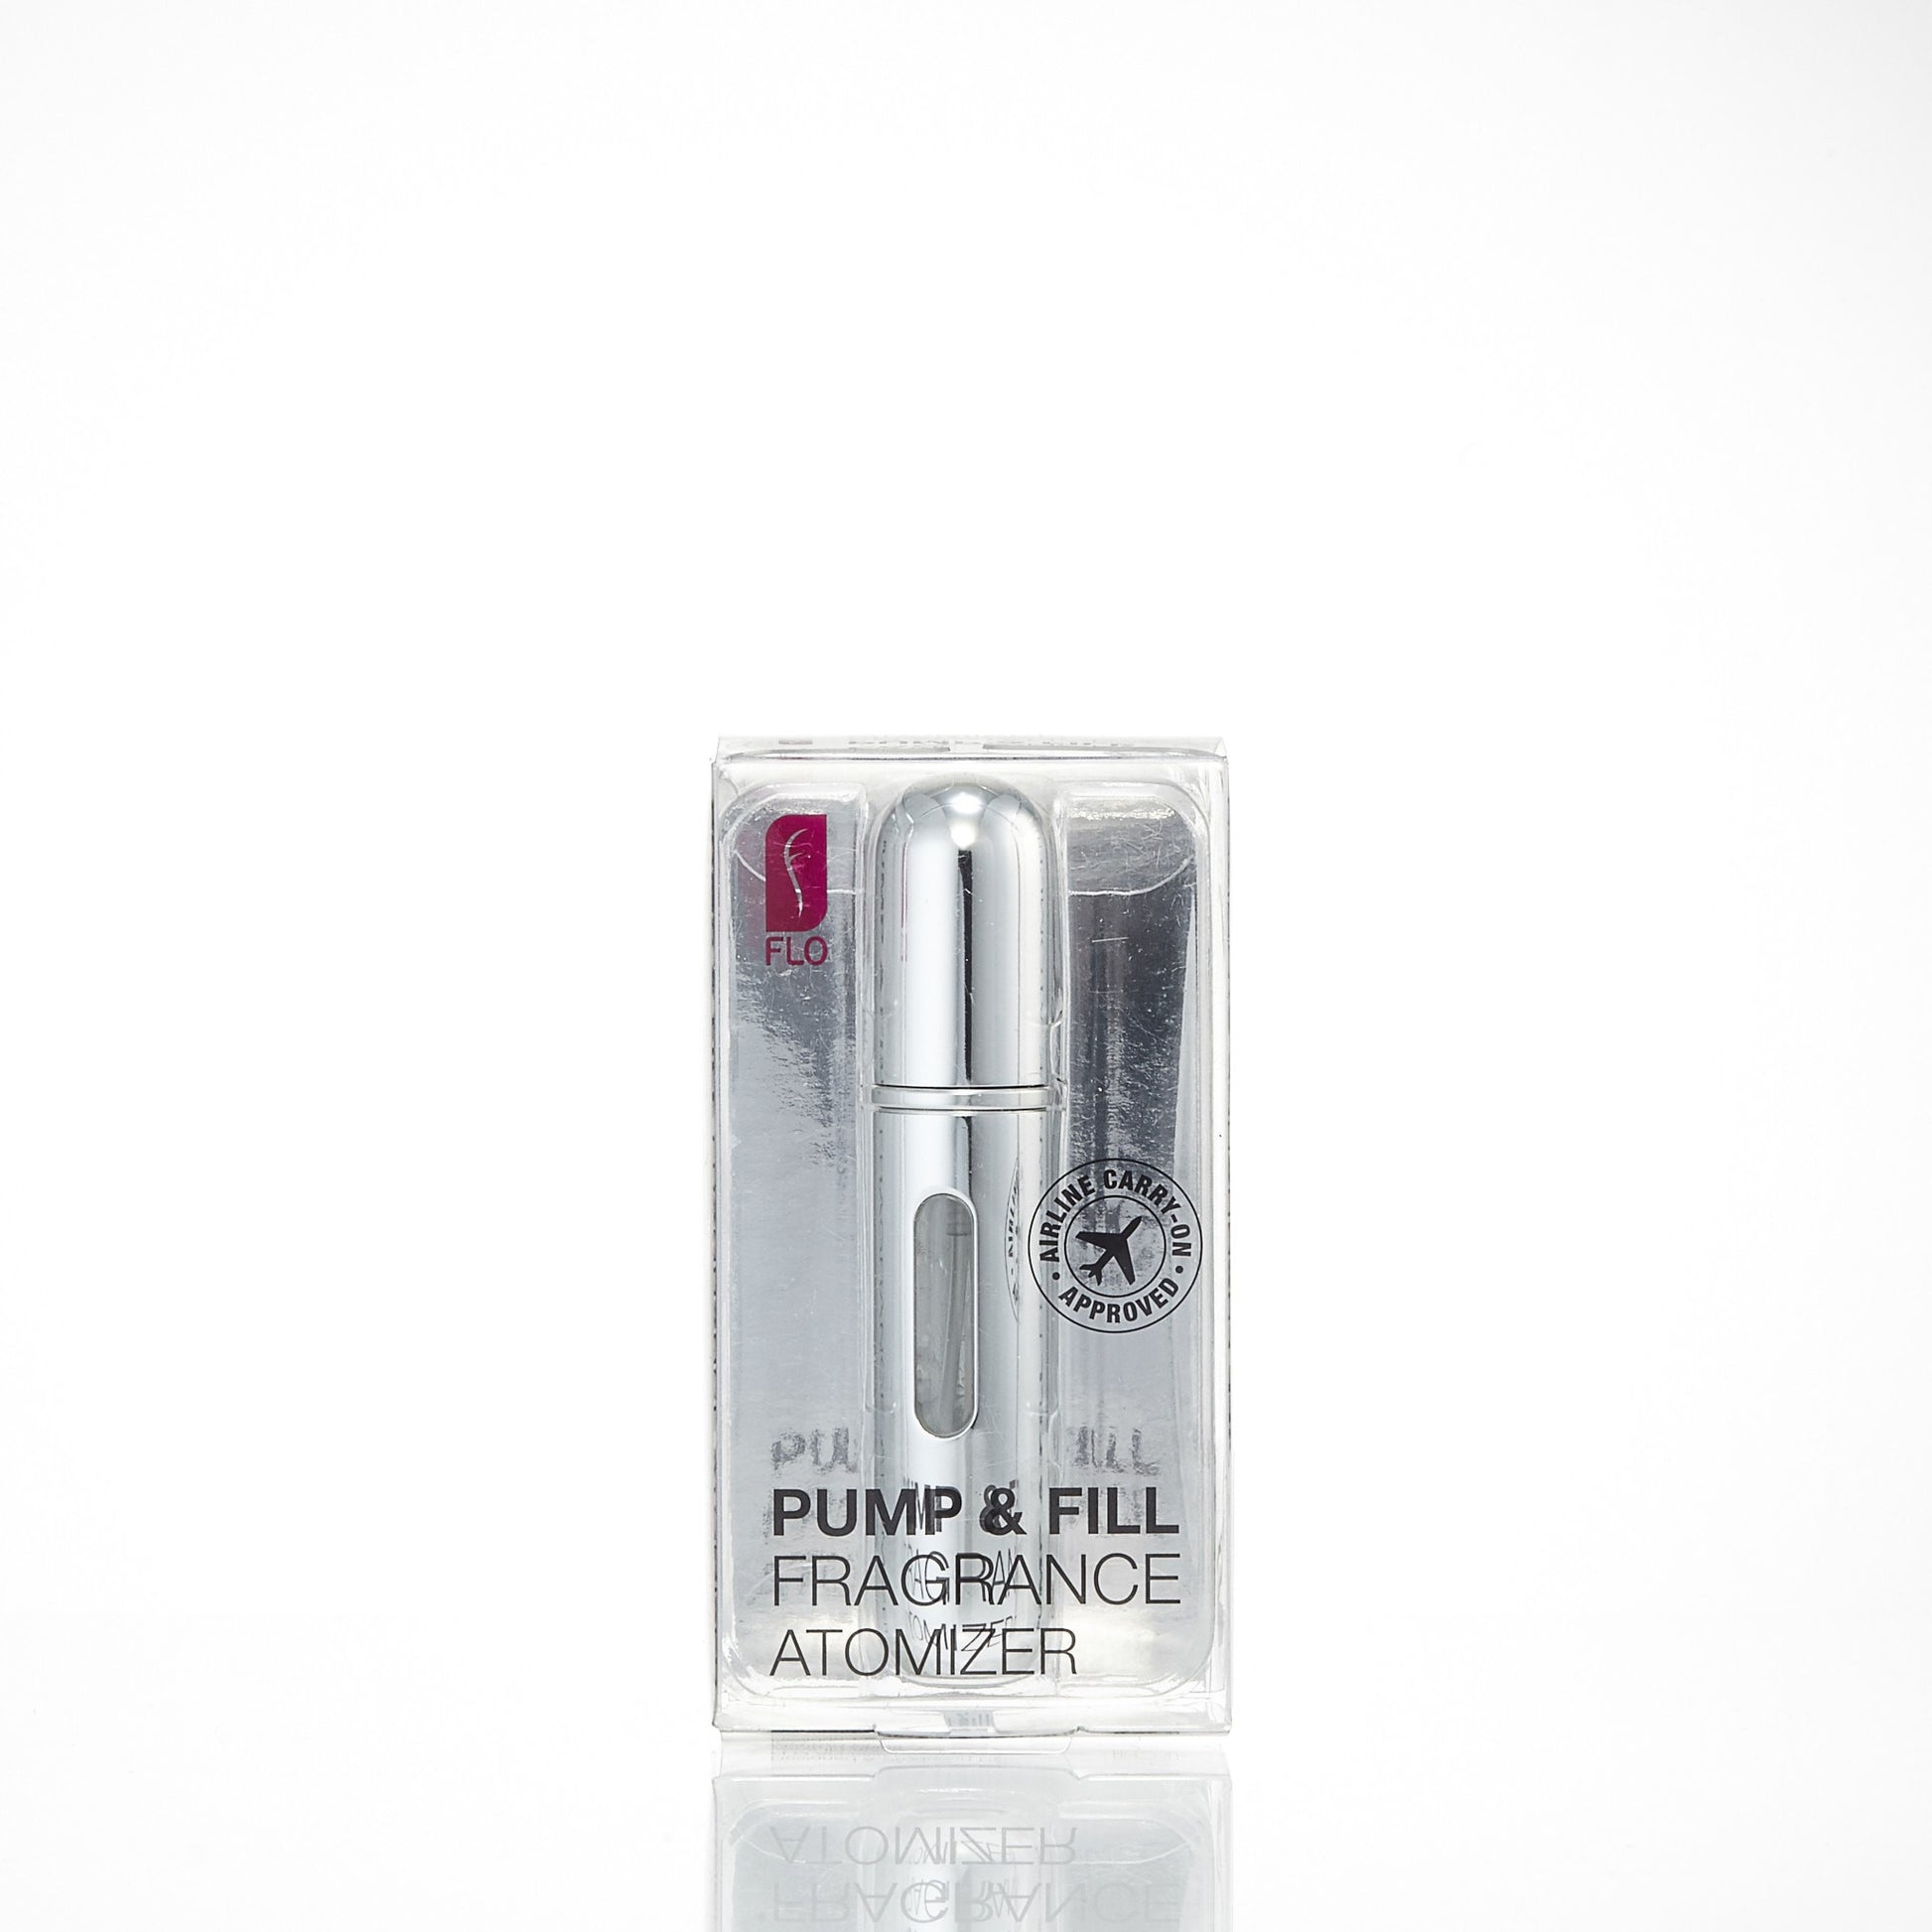 Pump and Fill Fragrance Atomizer by Flo Silver Click to open in modal